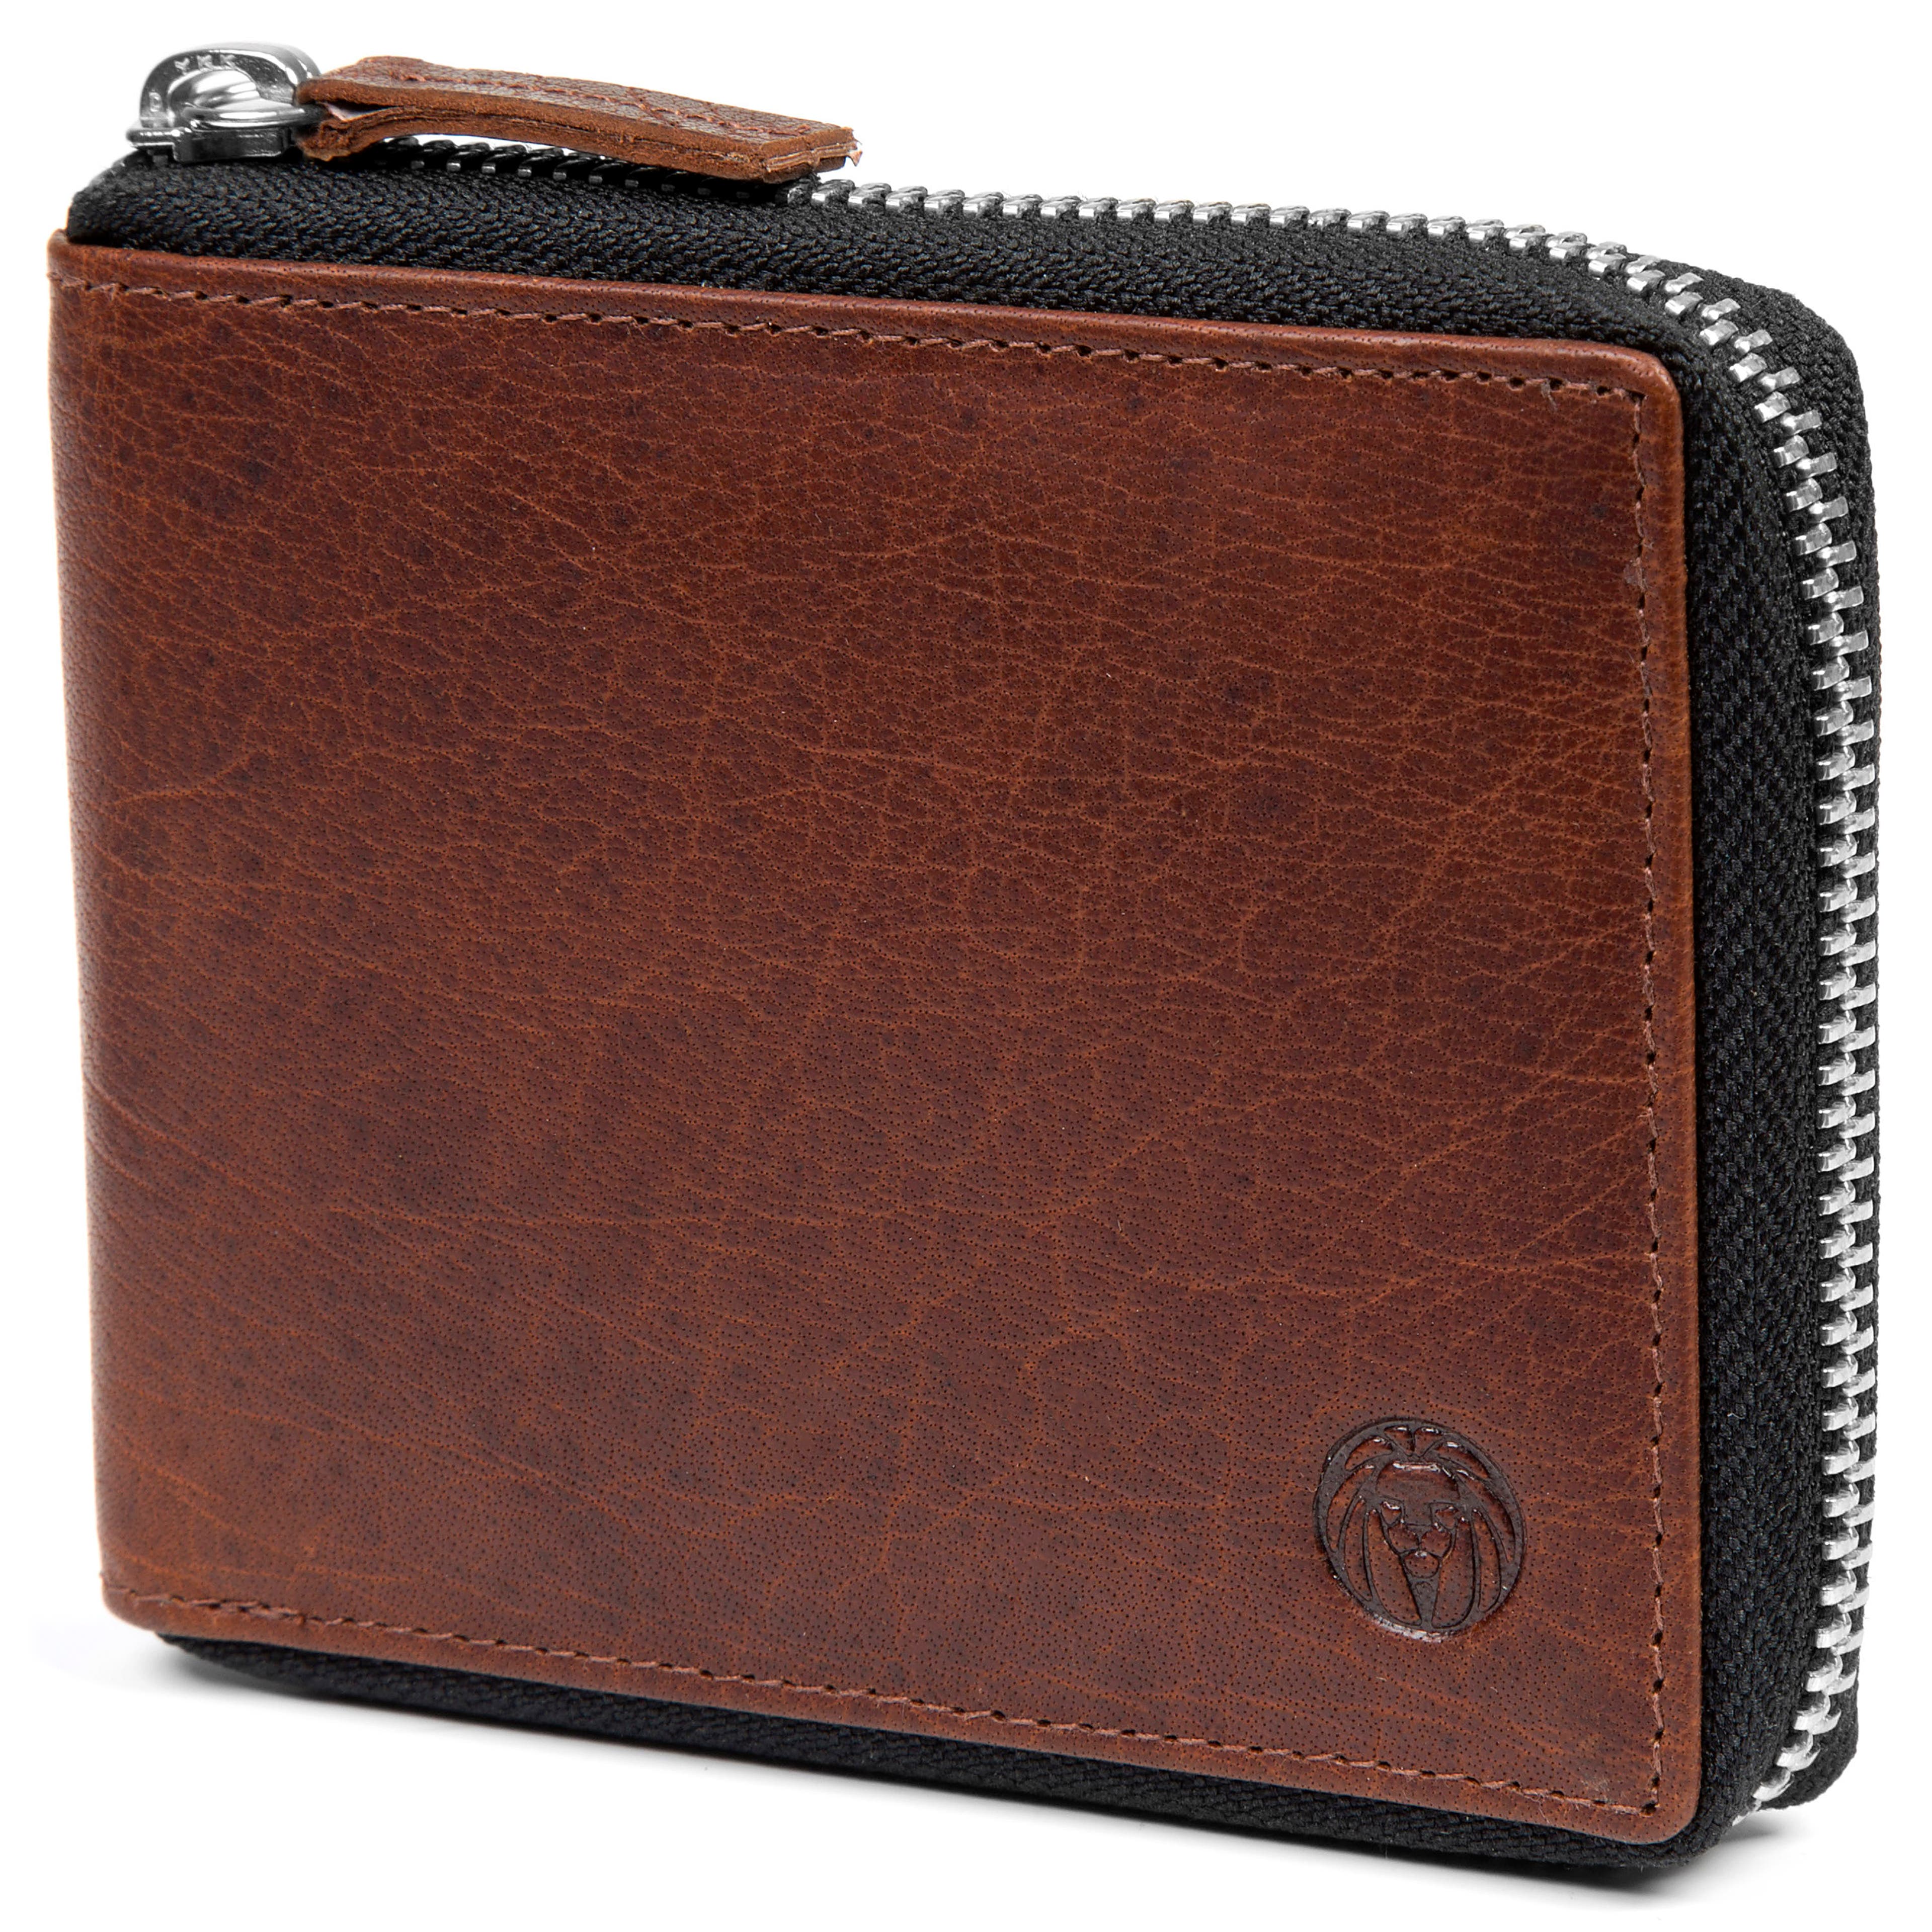 Montreal Zip-Lined Tan RFID Leather Wallet